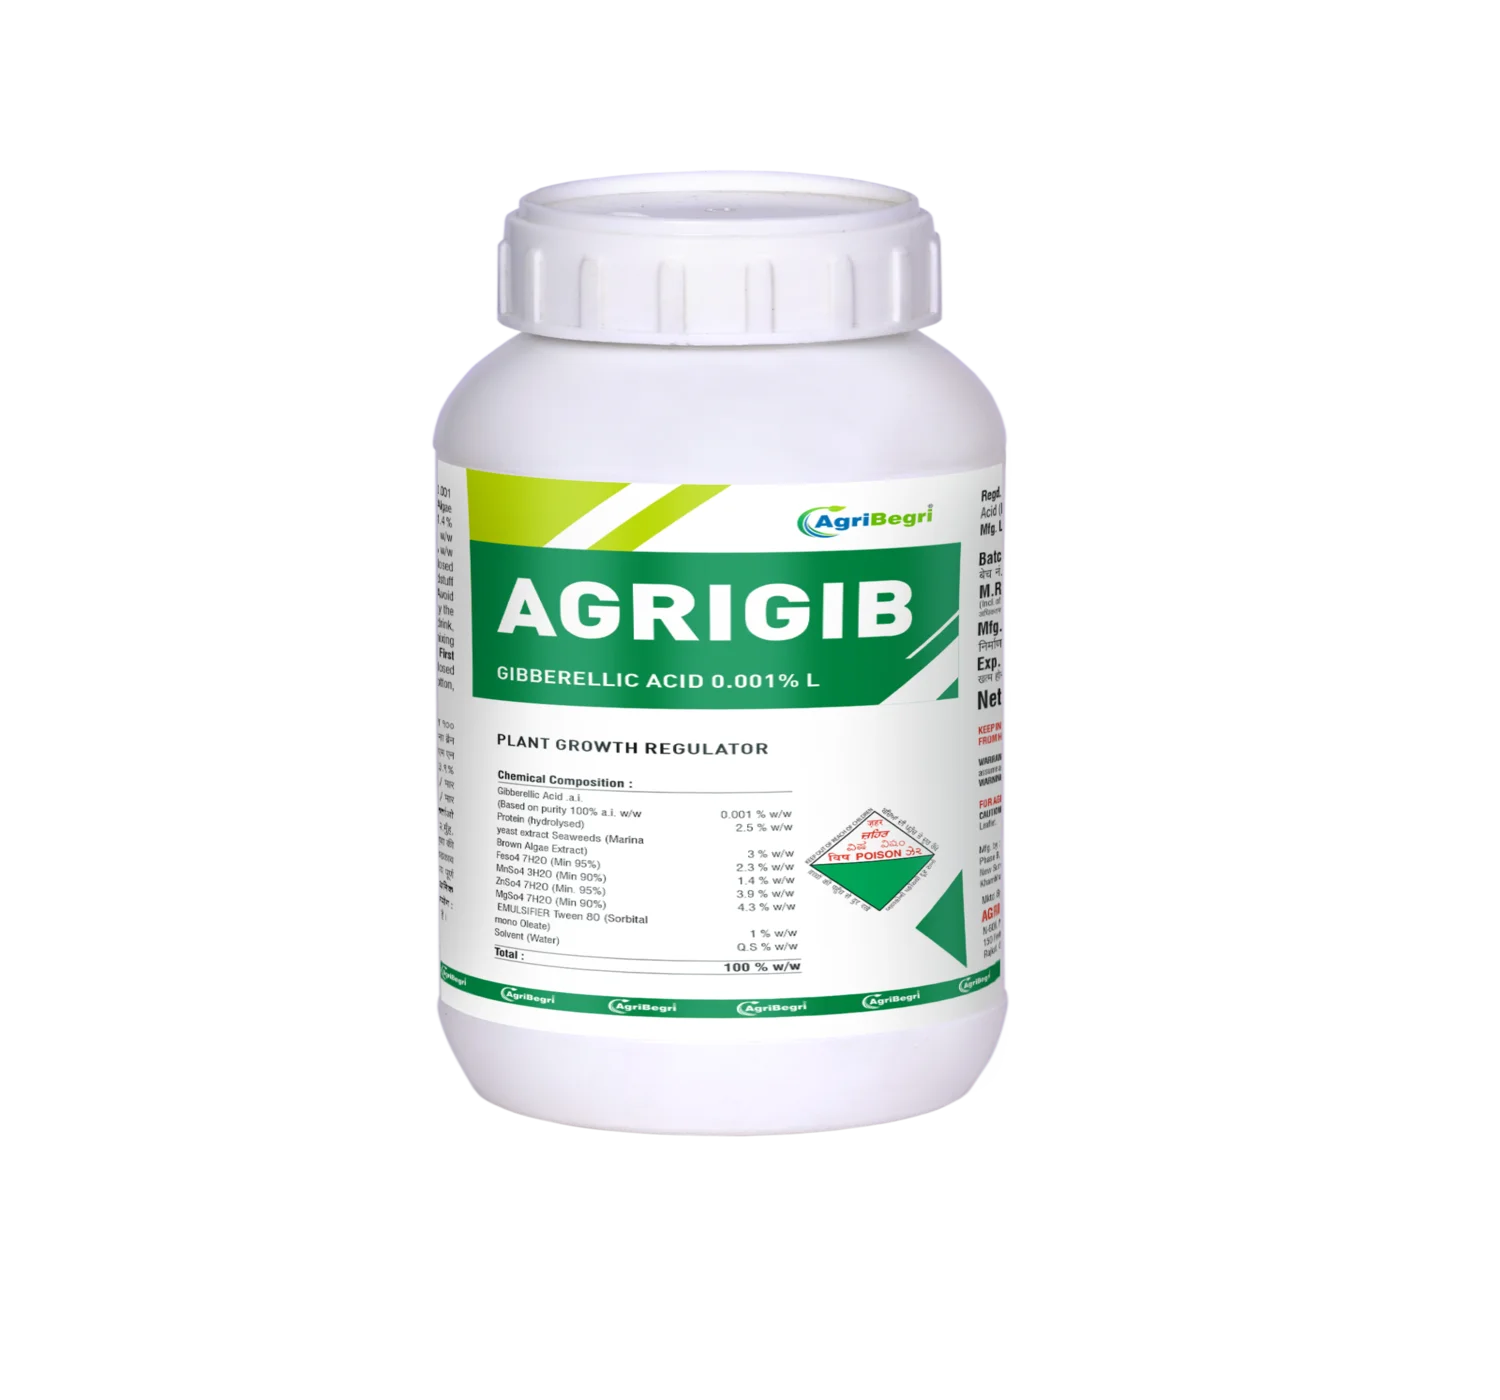 Agrigib Gibberellic Acid 0.001% L Plant Growth Regulator, Used For All Type Of Crops.